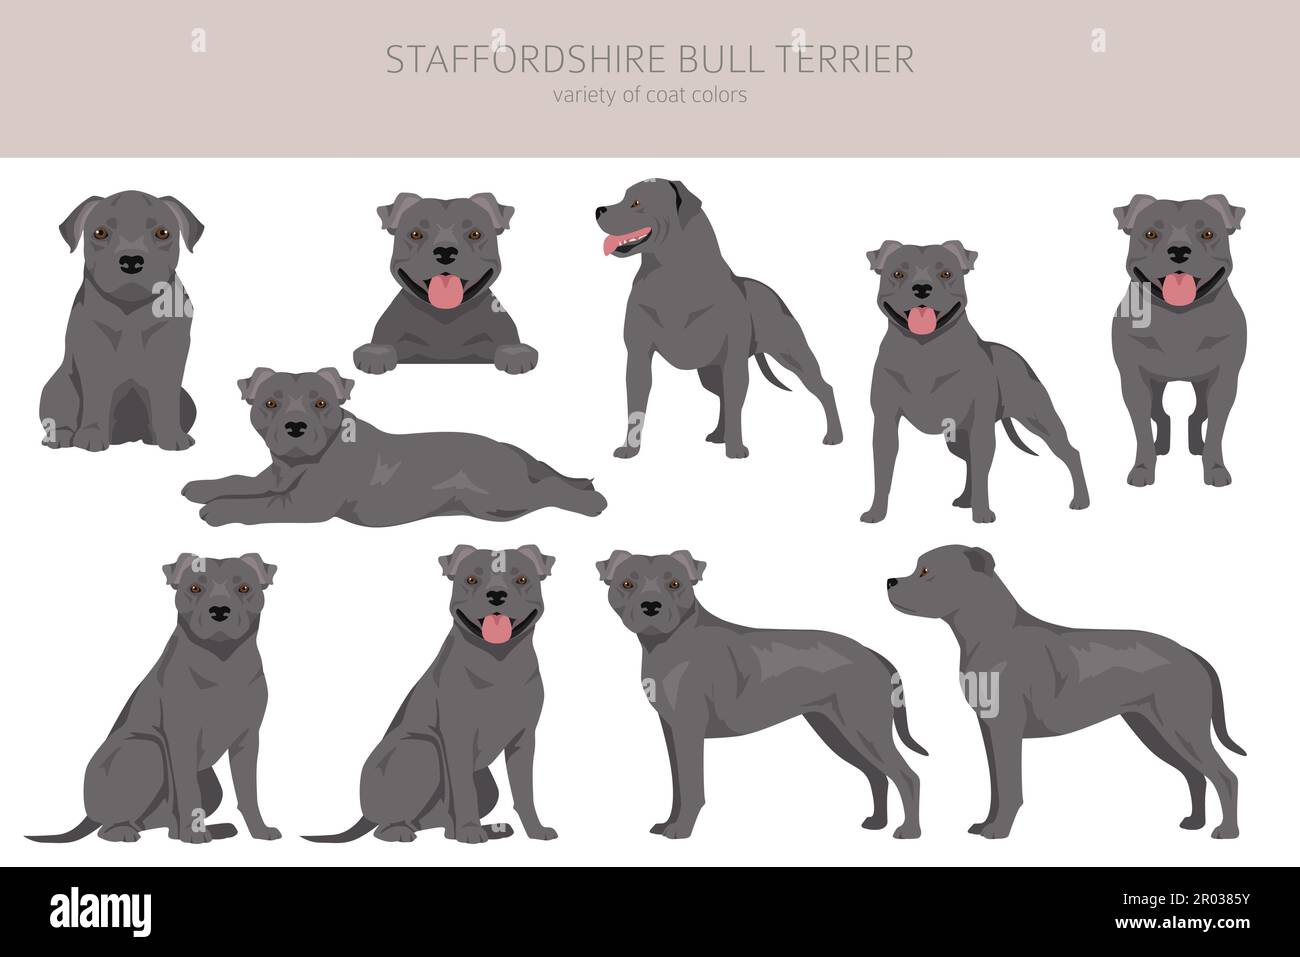 Staffordshire bull terrier. Different variaties of coat color bully dogs set.  Vector illustration Stock Vector